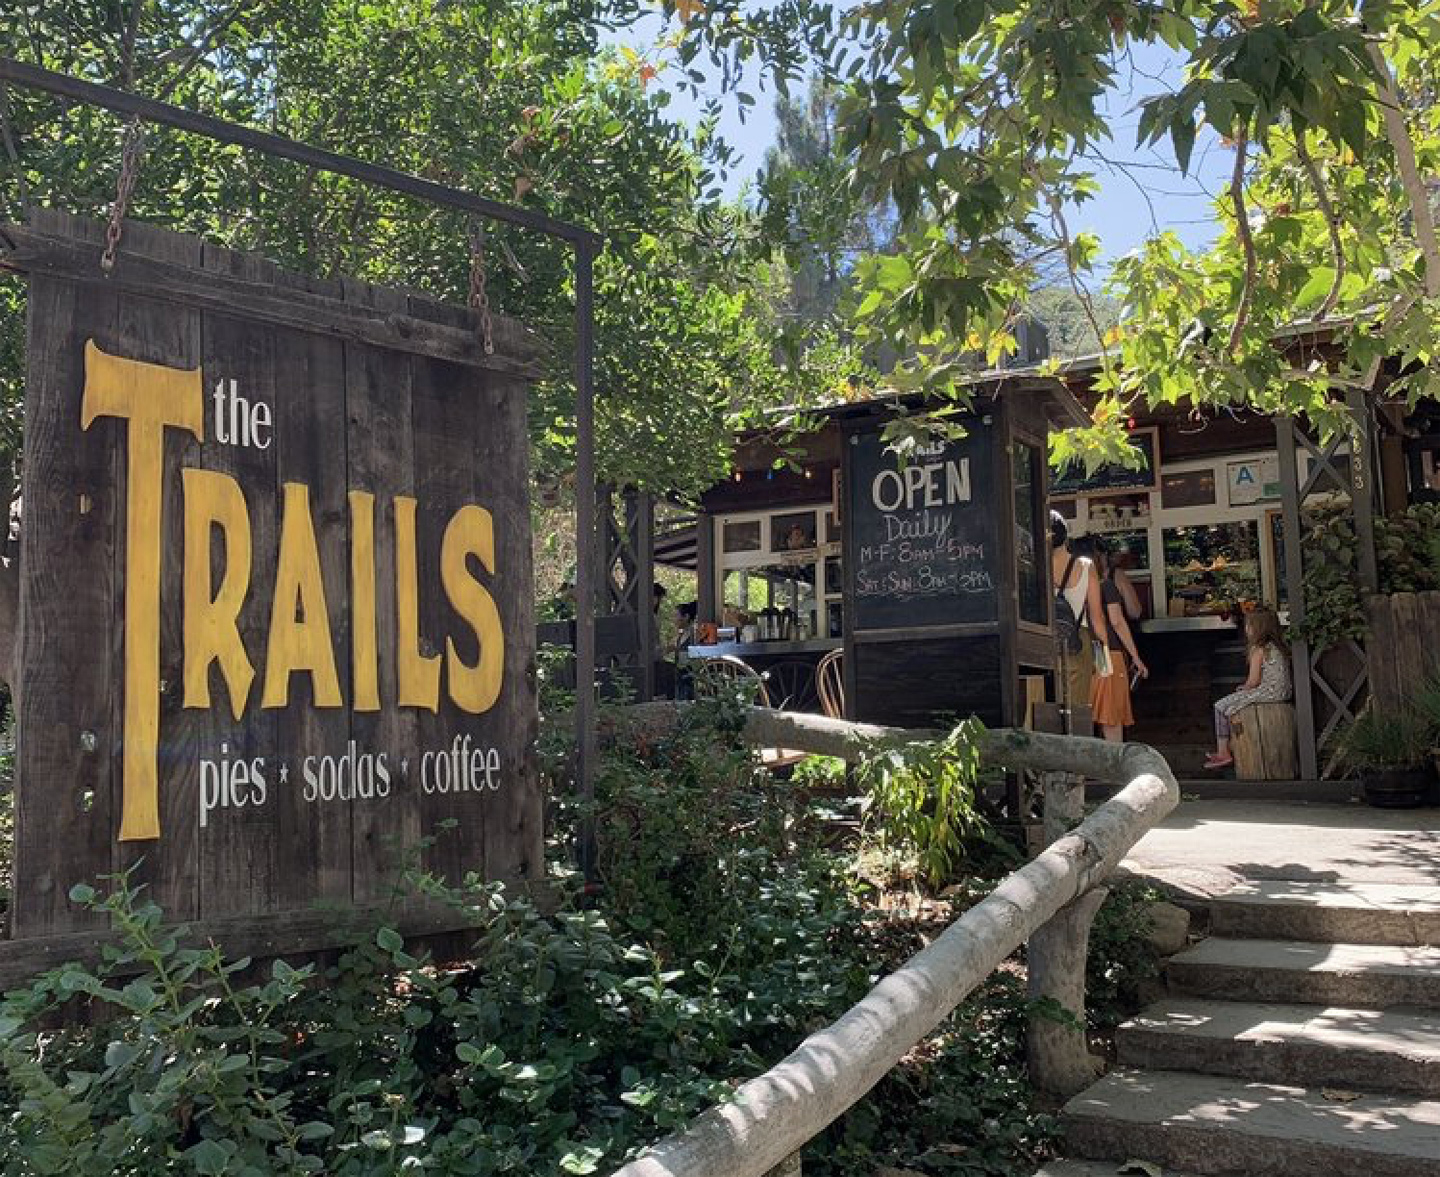 THE TRAILS CAFE